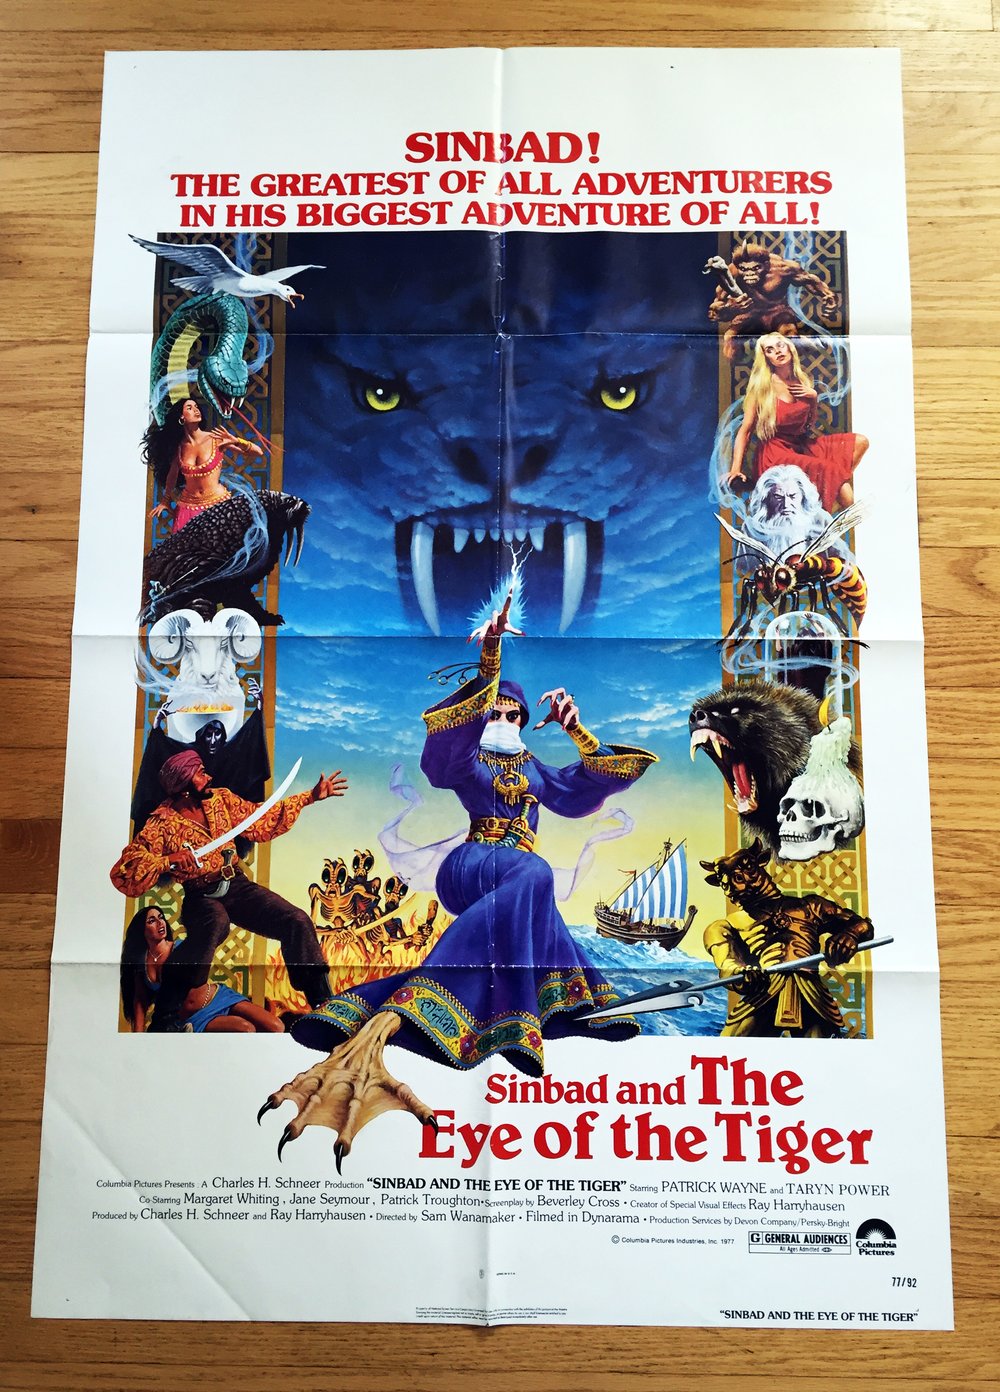 1977 SINBAD AND THE EYE OF THE TIGER Original U.S. One Sheet Movie Poster